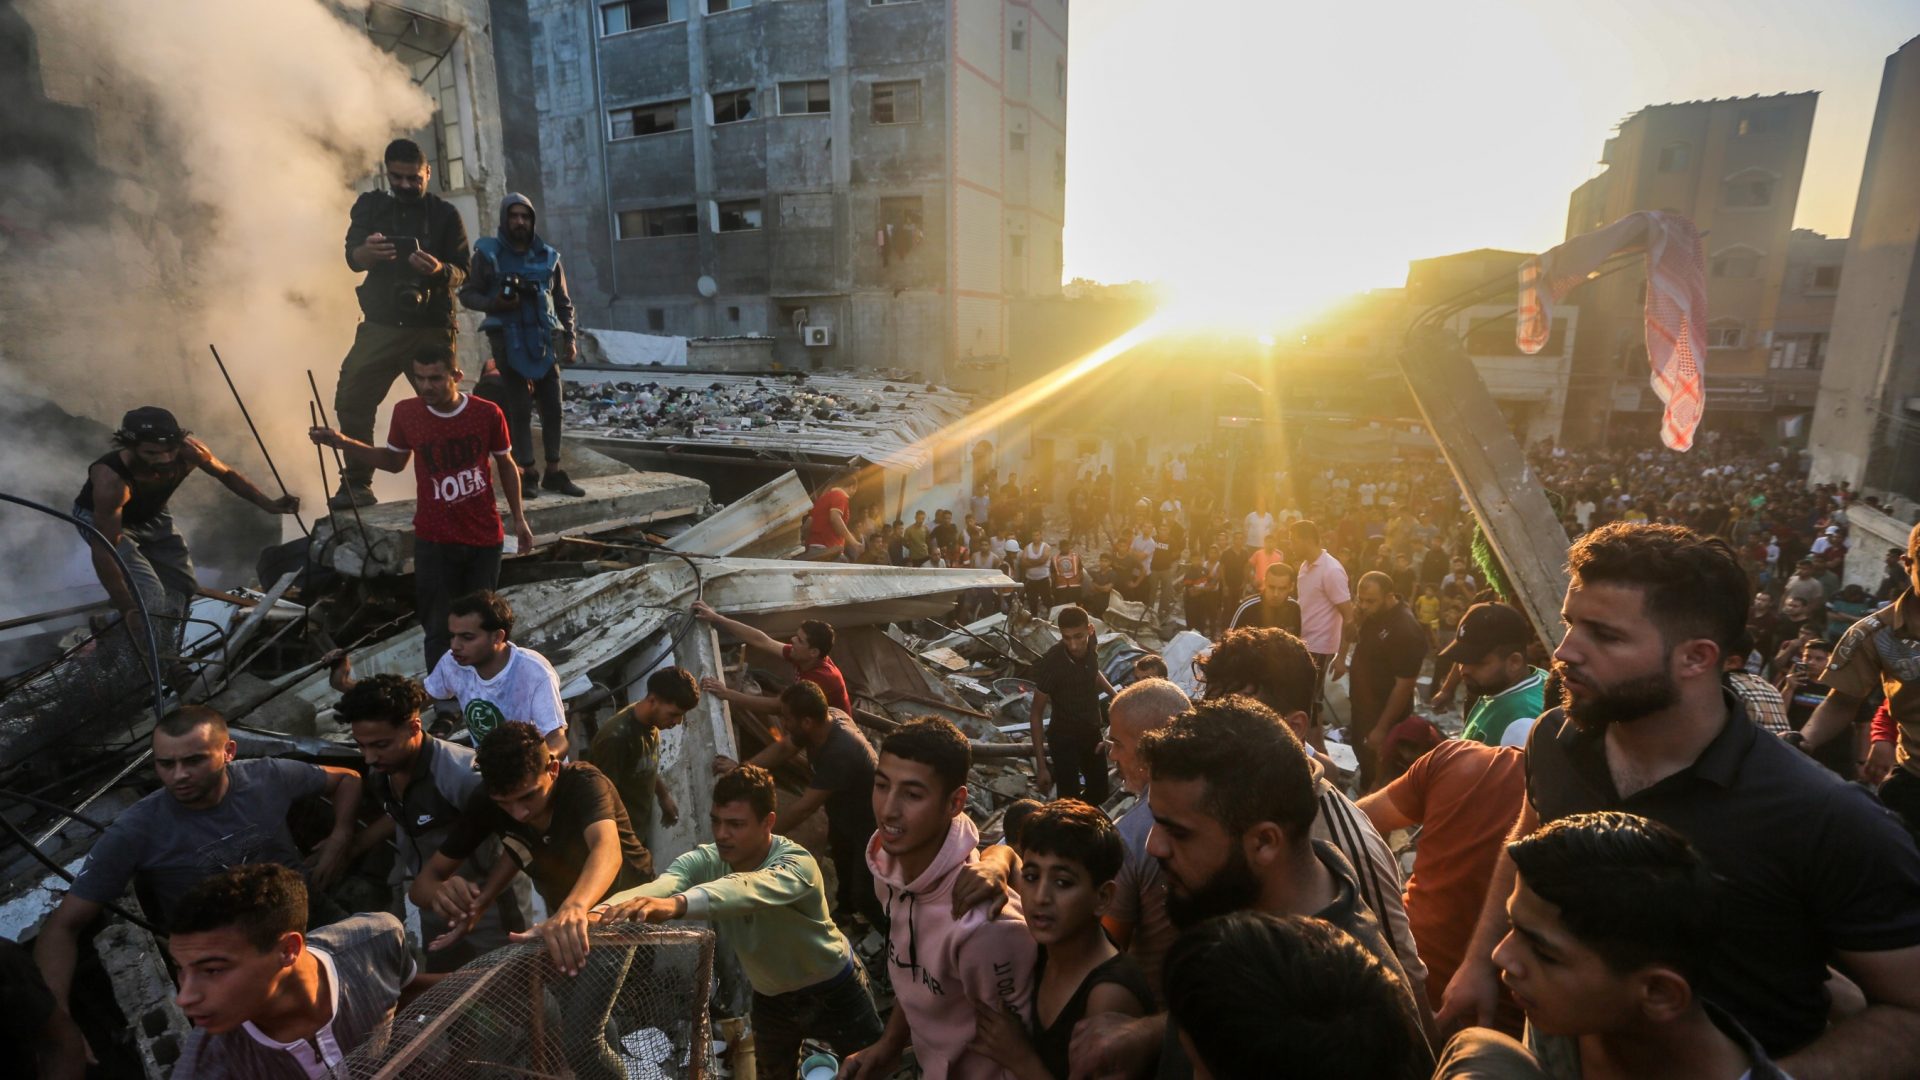 People in Khan Yunis search for survivors of bombardment in the southern Gaza Strip, November 4. Photo: Ahmad Hasaballah/Getty 

